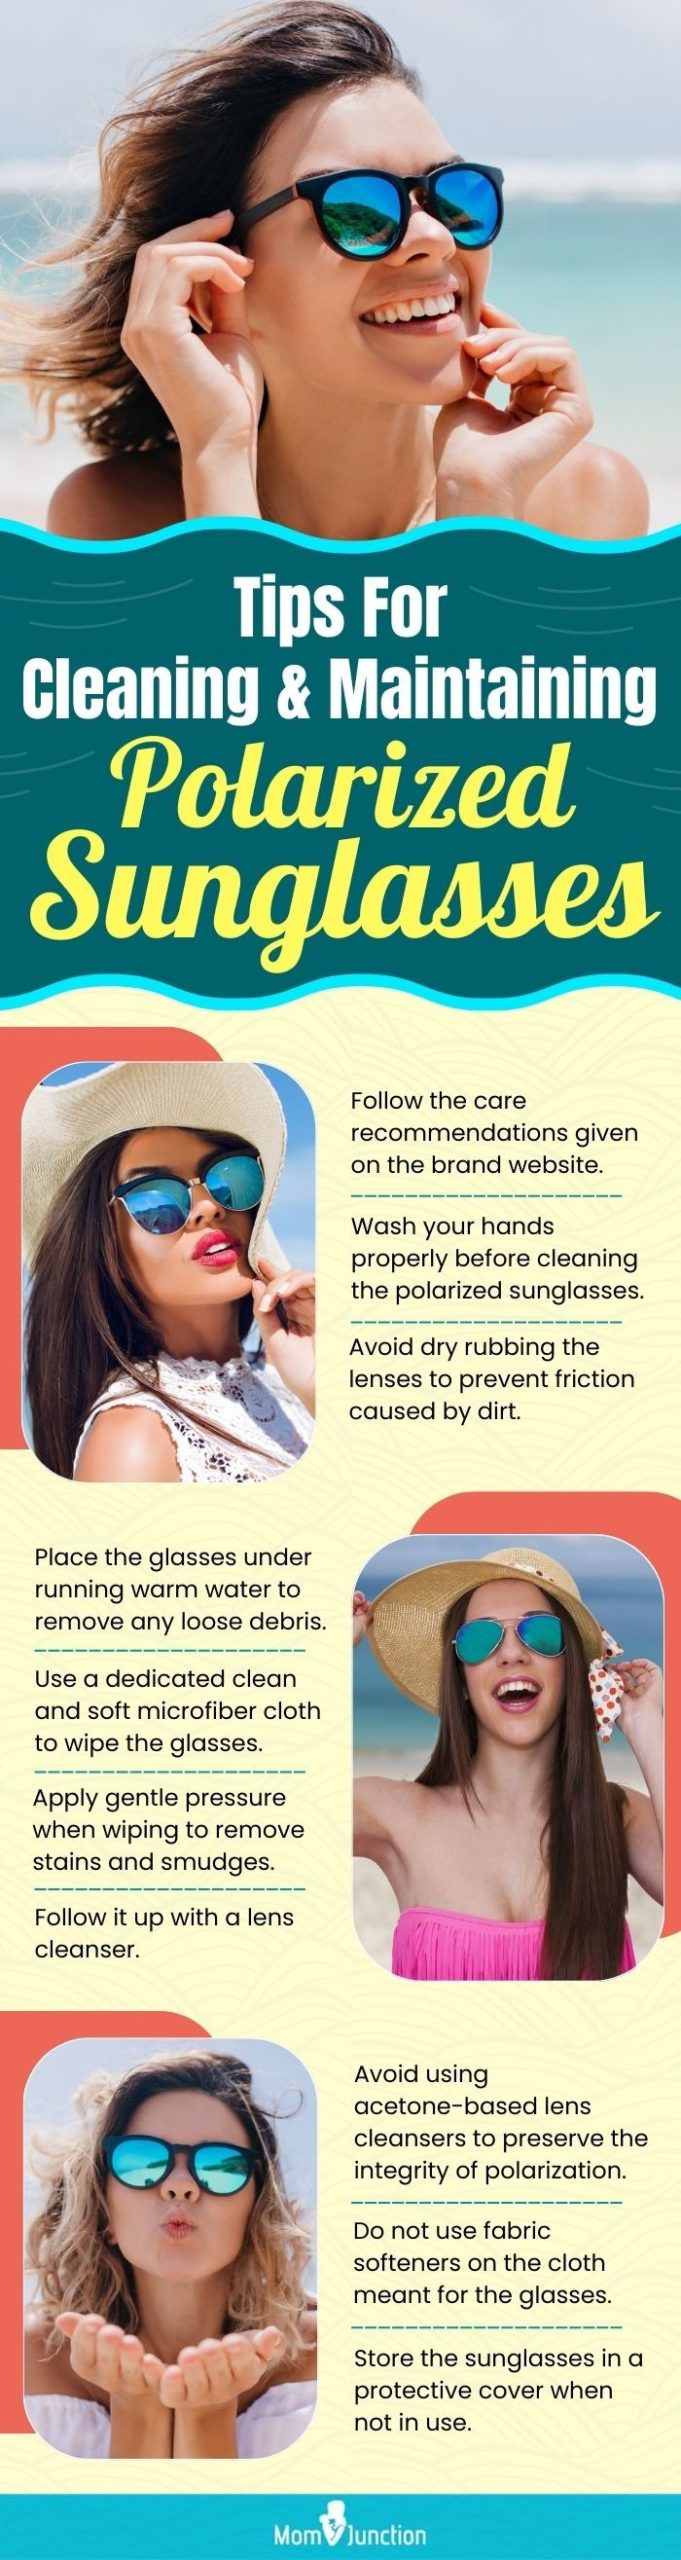 Tips For Cleaning And Maintaining Polarized Sunglasses (infographic)